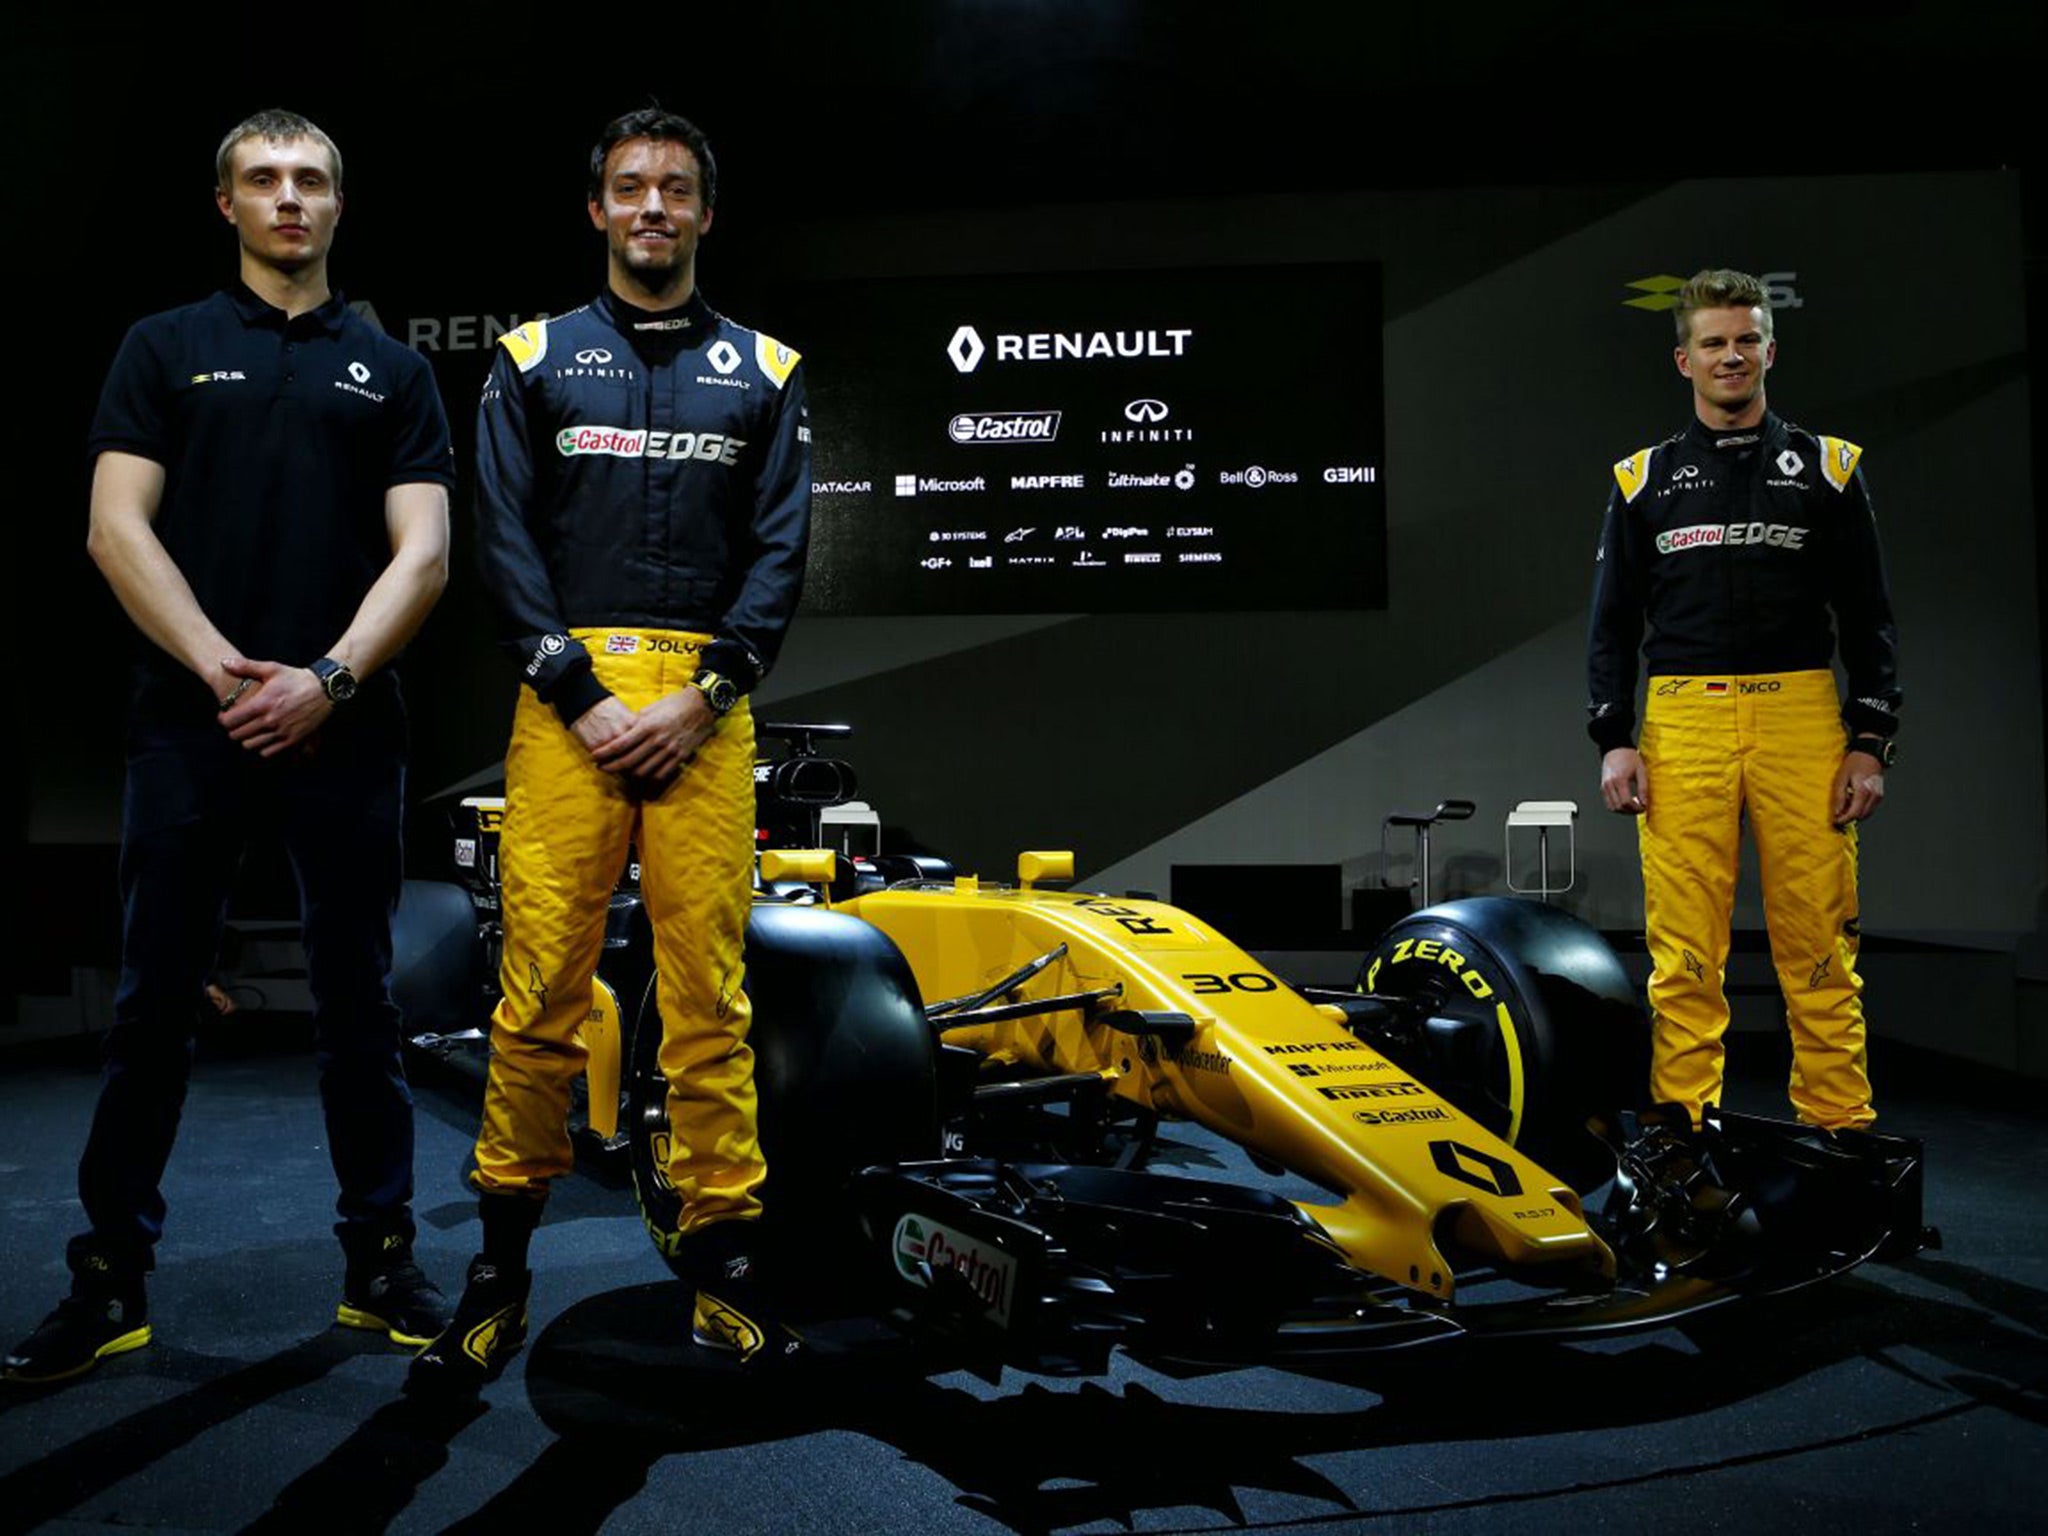 Renault finished ninth out of 11 last year with drivers Kevin Magnussen of Denmark and Briton Jolyon Palmer